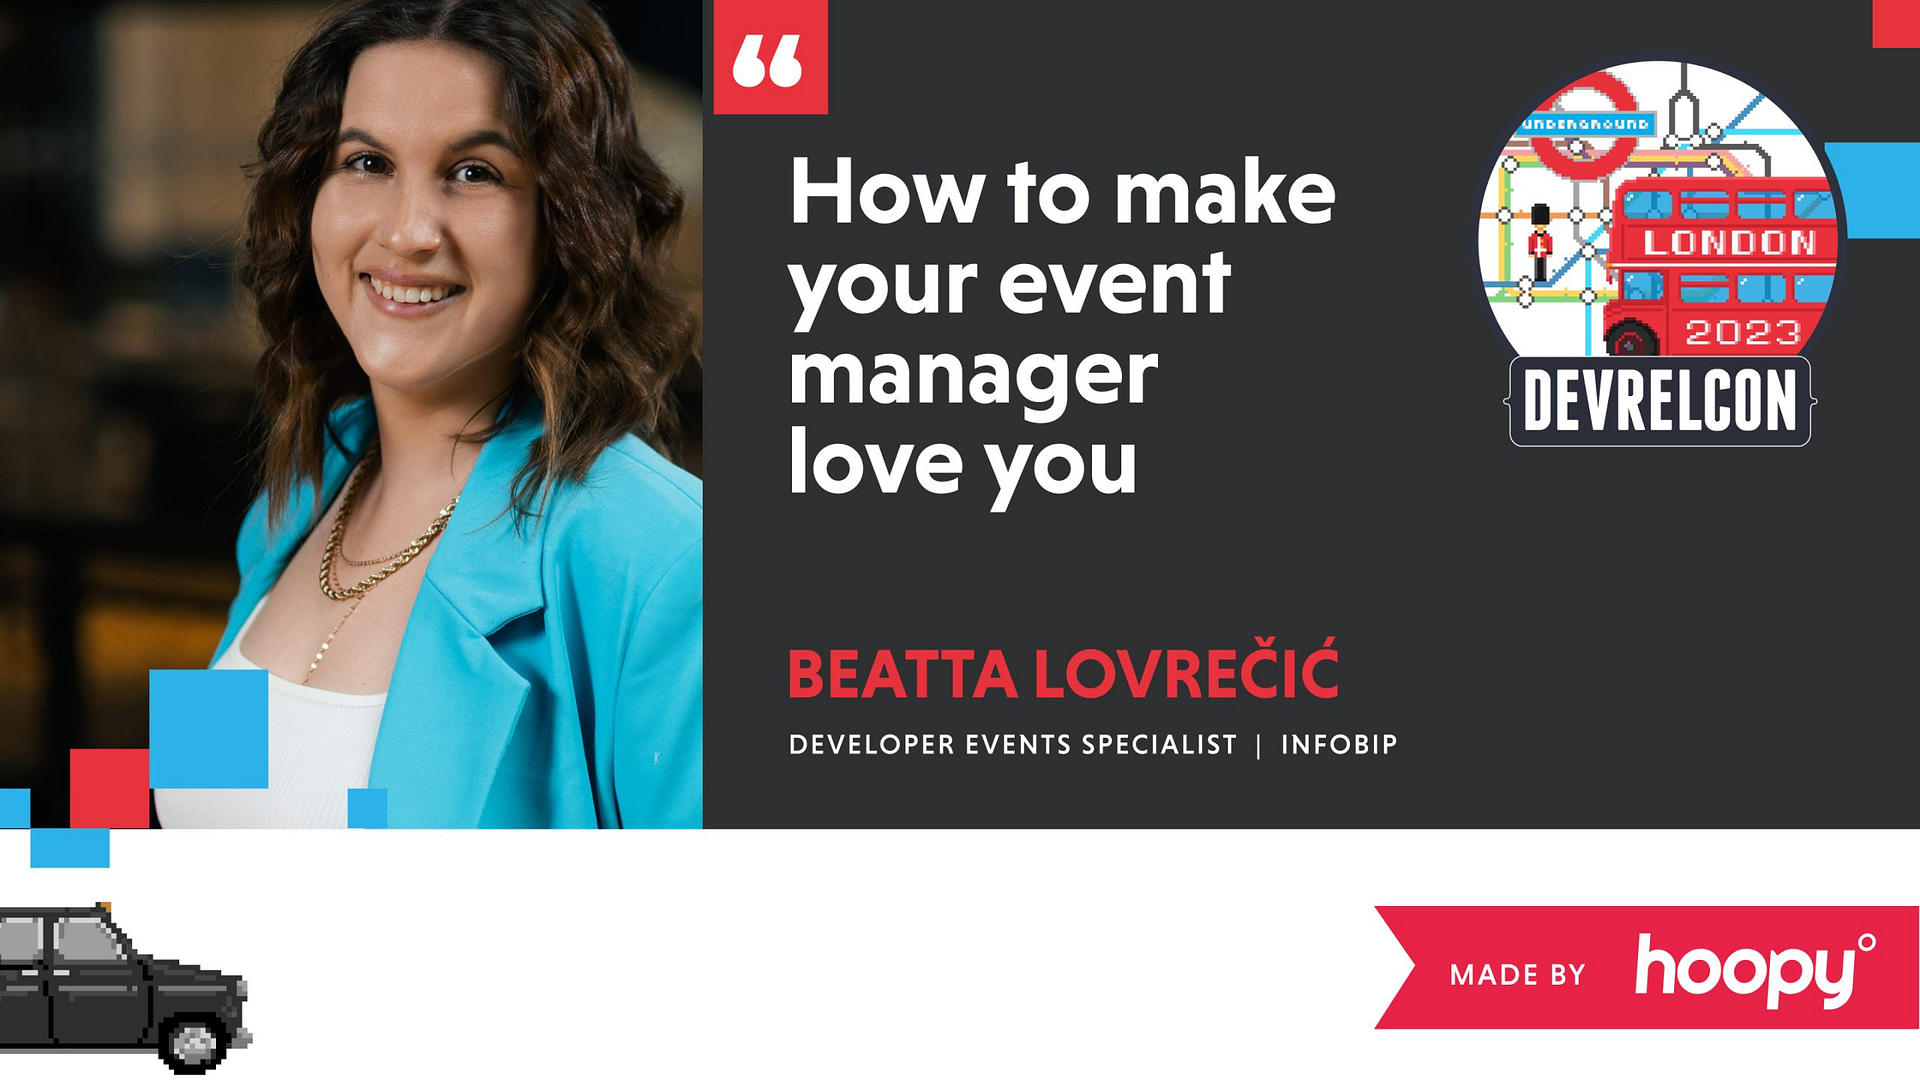 A promotional graphic for an event with a photo of a smiling woman on the left. Text next to her reads 'How to make your event manager love you' in white and red letters. The woman's name 'BEATTA LOVREČIĆ', her title 'DEVELOPER EVENTS SPECIALIST | INFOBIP', and the event name 'DEVRELCON' are displayed below the text. Icons representing London, including the Underground sign and a red bus, adorn the top right corner. The image has a playful design with geometric shapes in red and blue and is marked as 'MADE BY HOOPY' at the bottom right.